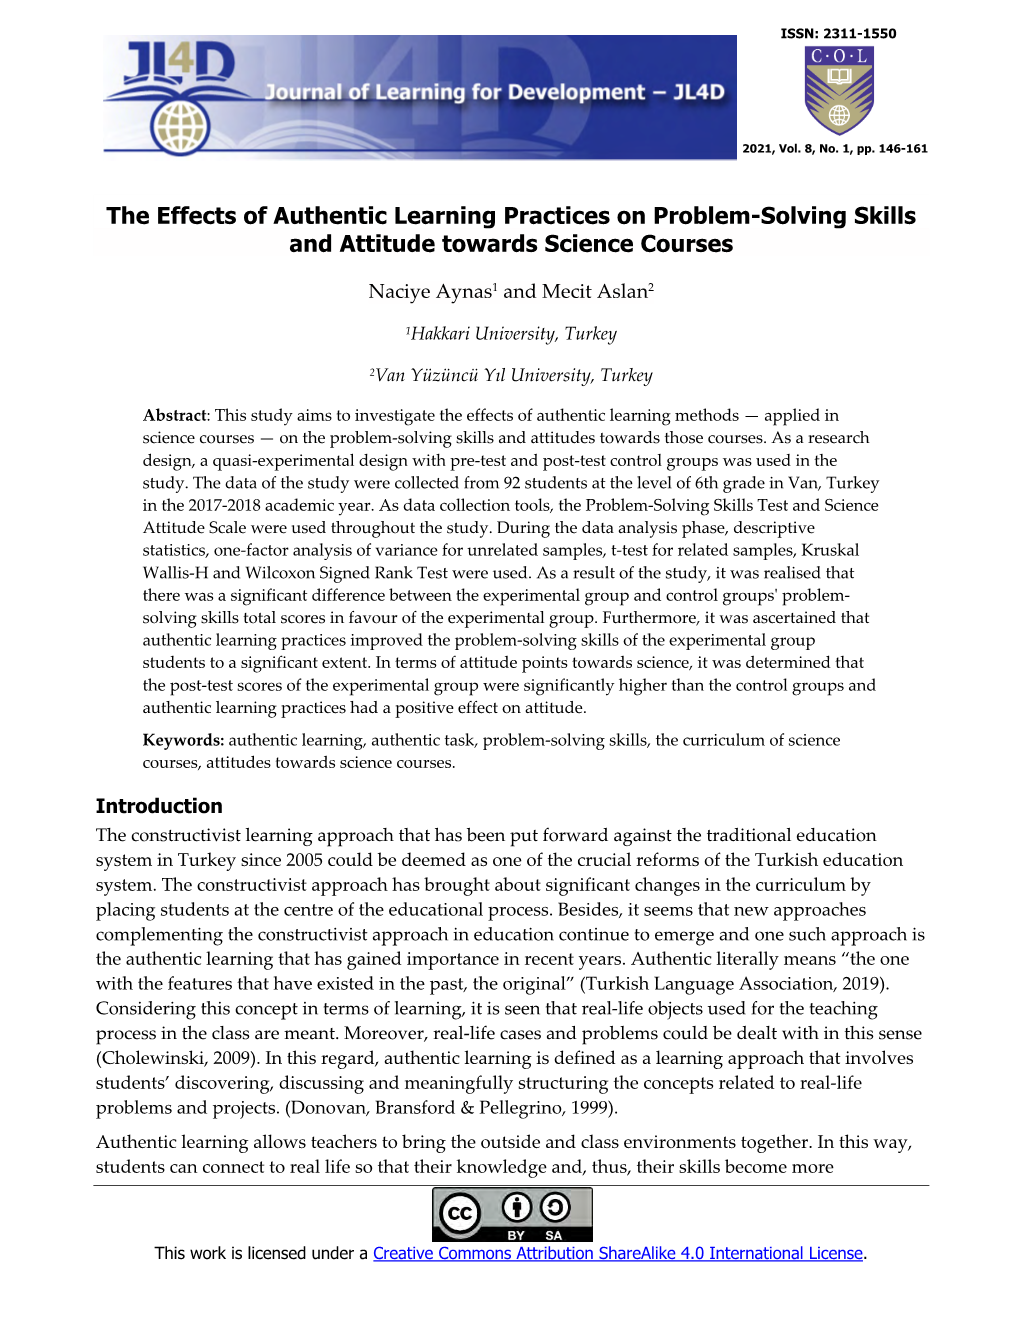 The Effects of Authentic Learning Practices on Problem-Solving Skills and Attitude Towards Science Courses